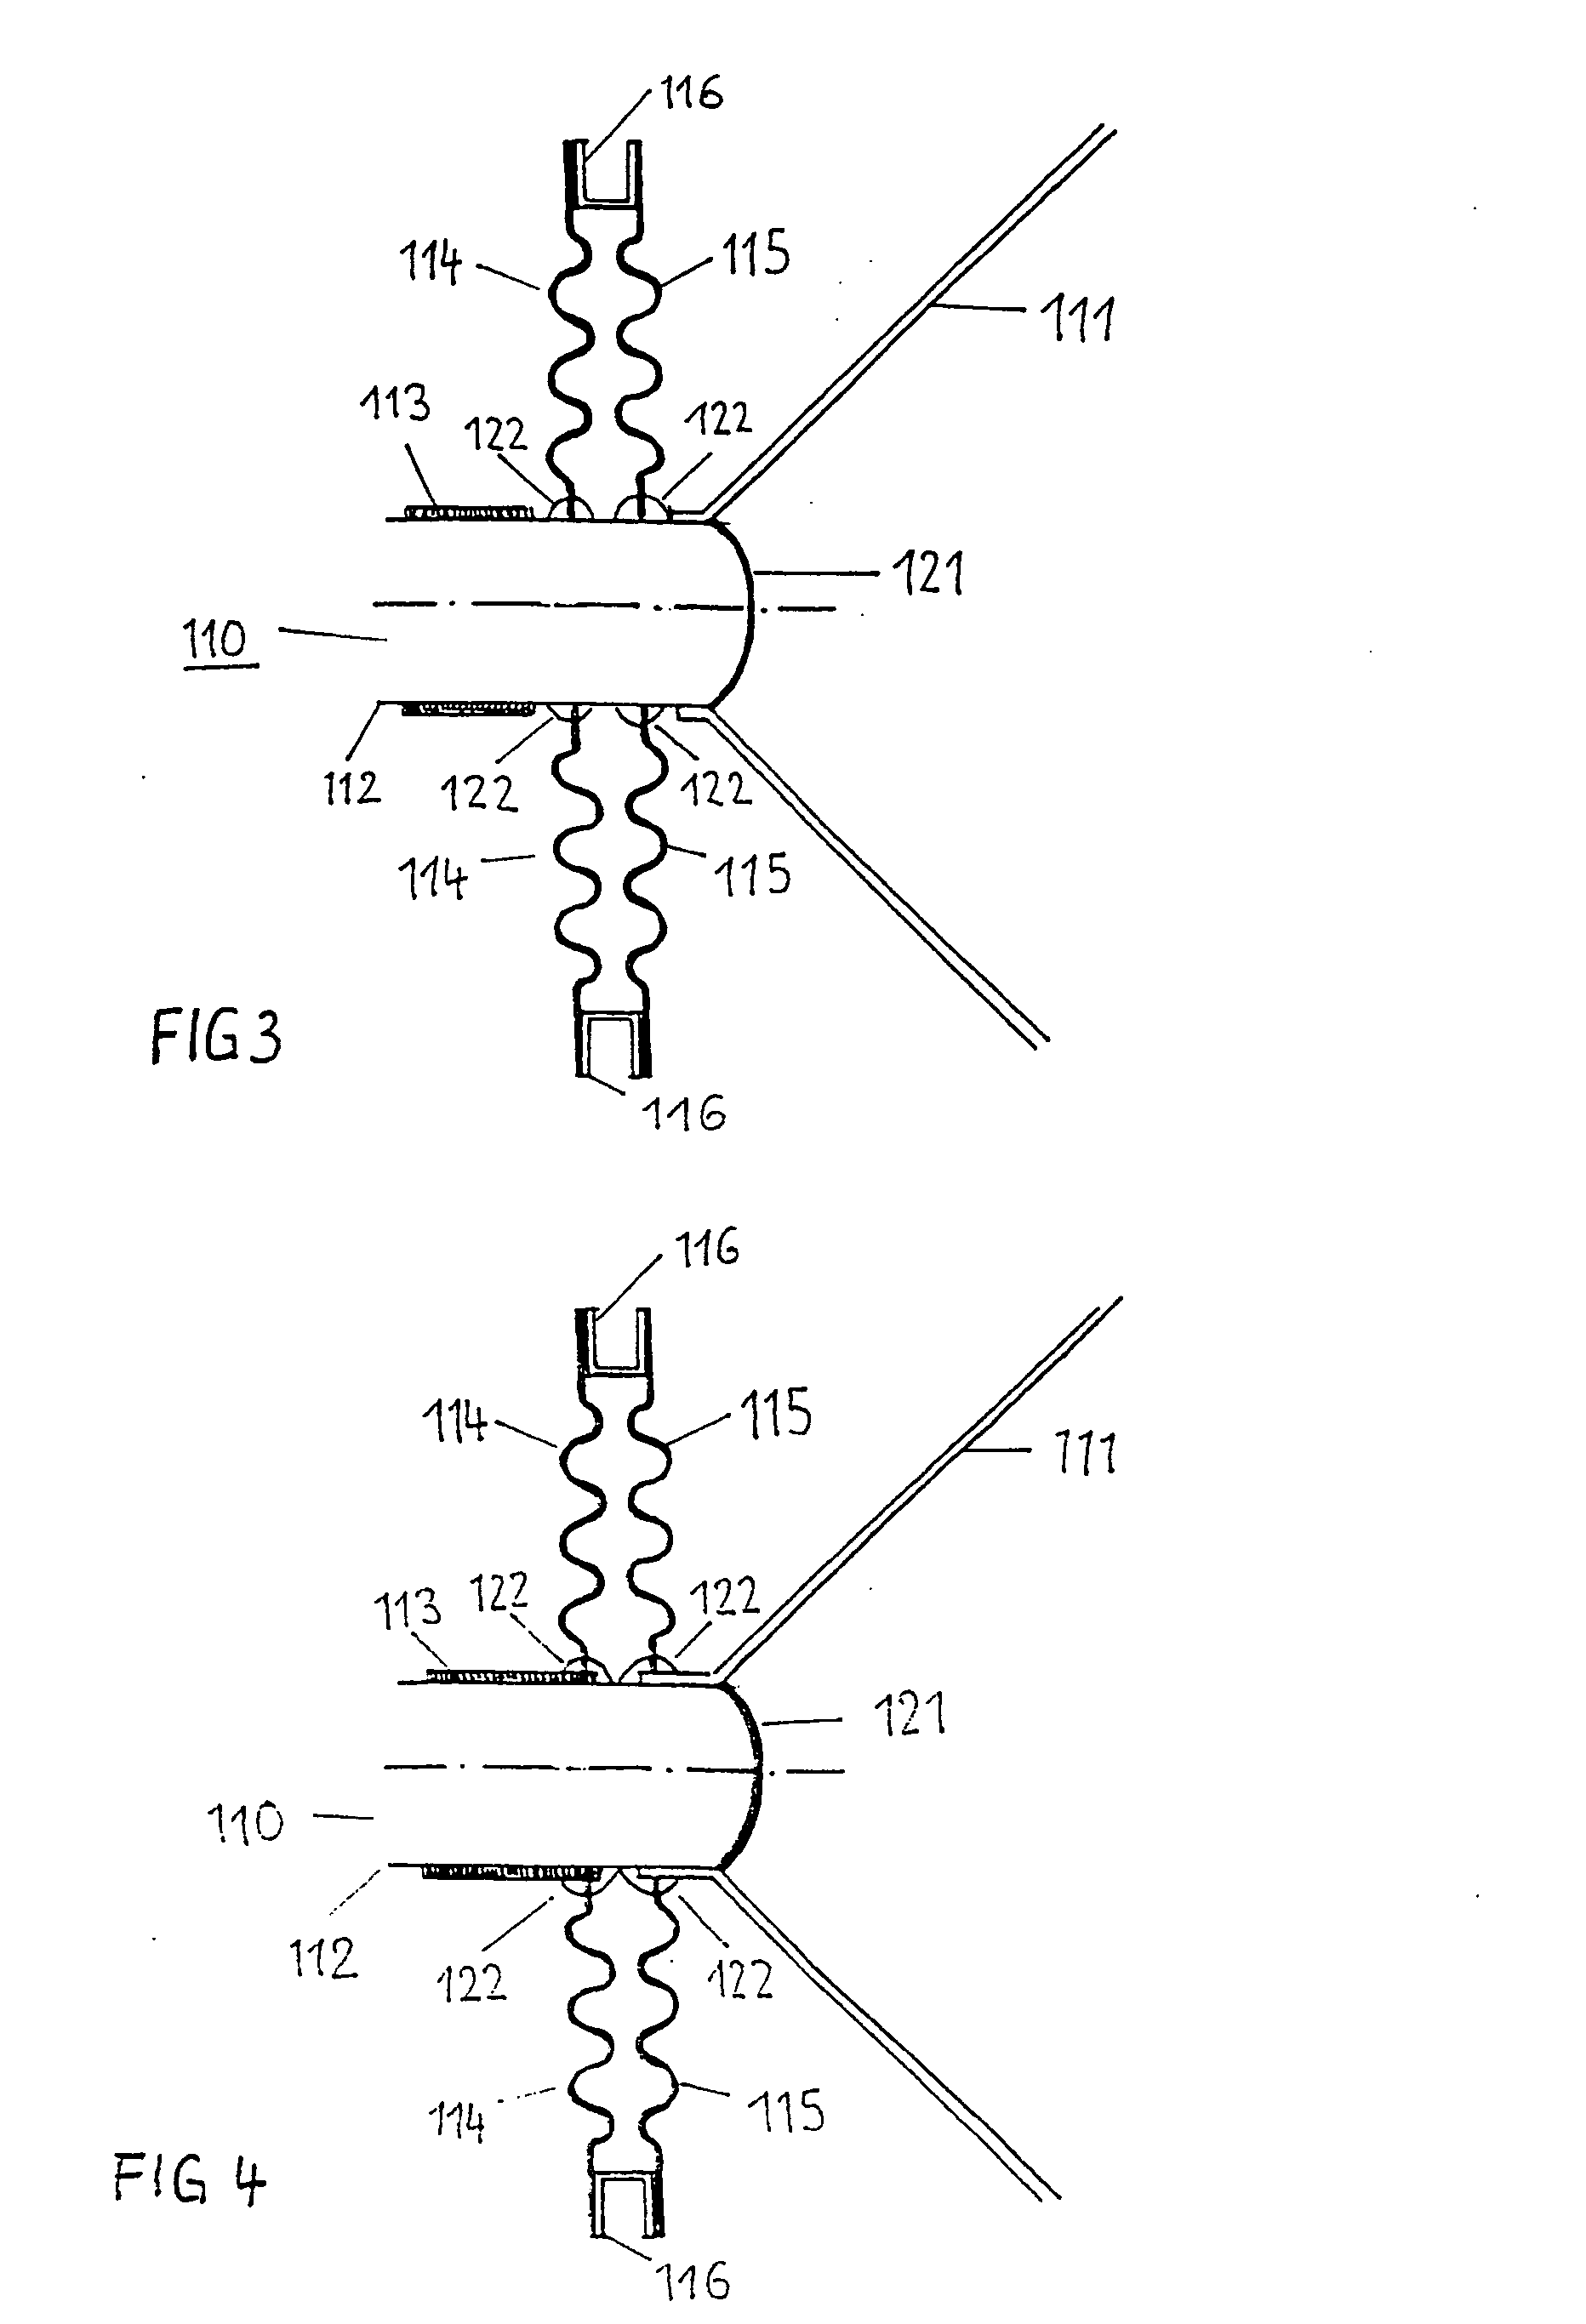 Loudspeaker with a double spider centering system